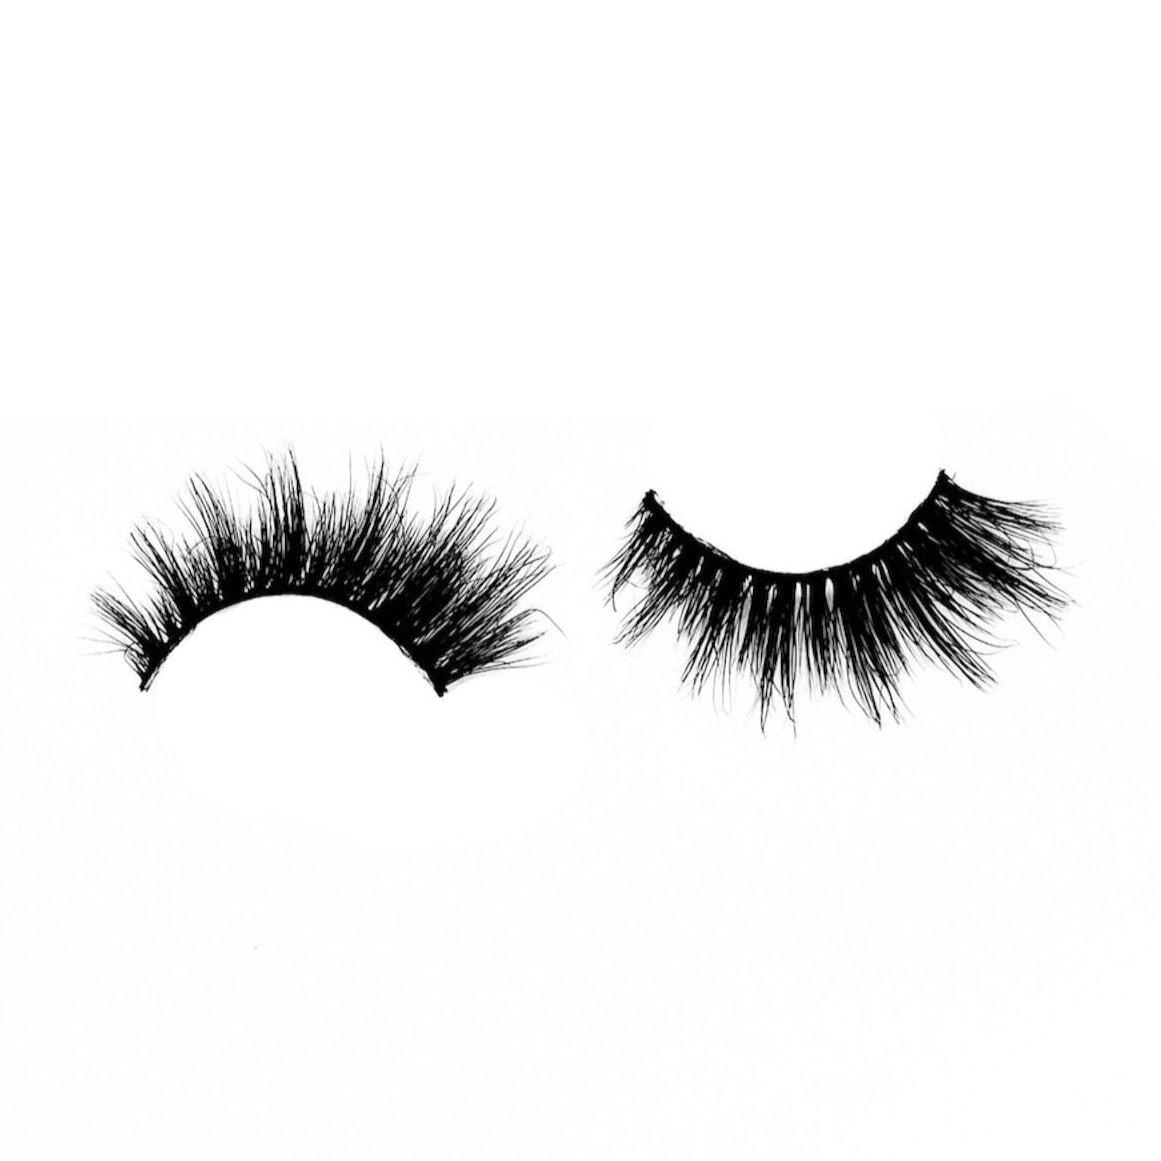 Charmer-Medium Volume-Our super cute, wispy, and flirty 3D Mink lashes “Charmer” are quite the charm! “Charmer” is a MUST HAVE for your natural lashes collection, especially if you love wispy lashes. The layered lengths plus added length on the outer corners is the perfect combo for a fun, flirty look. Description Handmade, Cruelty-Free, Wear up to 30x Material: 100% Mink Band: Black Cotton Band Volume: Medium Style: Wispy, Flirty, Cat-eye, Natural To Use: Measure and size your lashes by placing